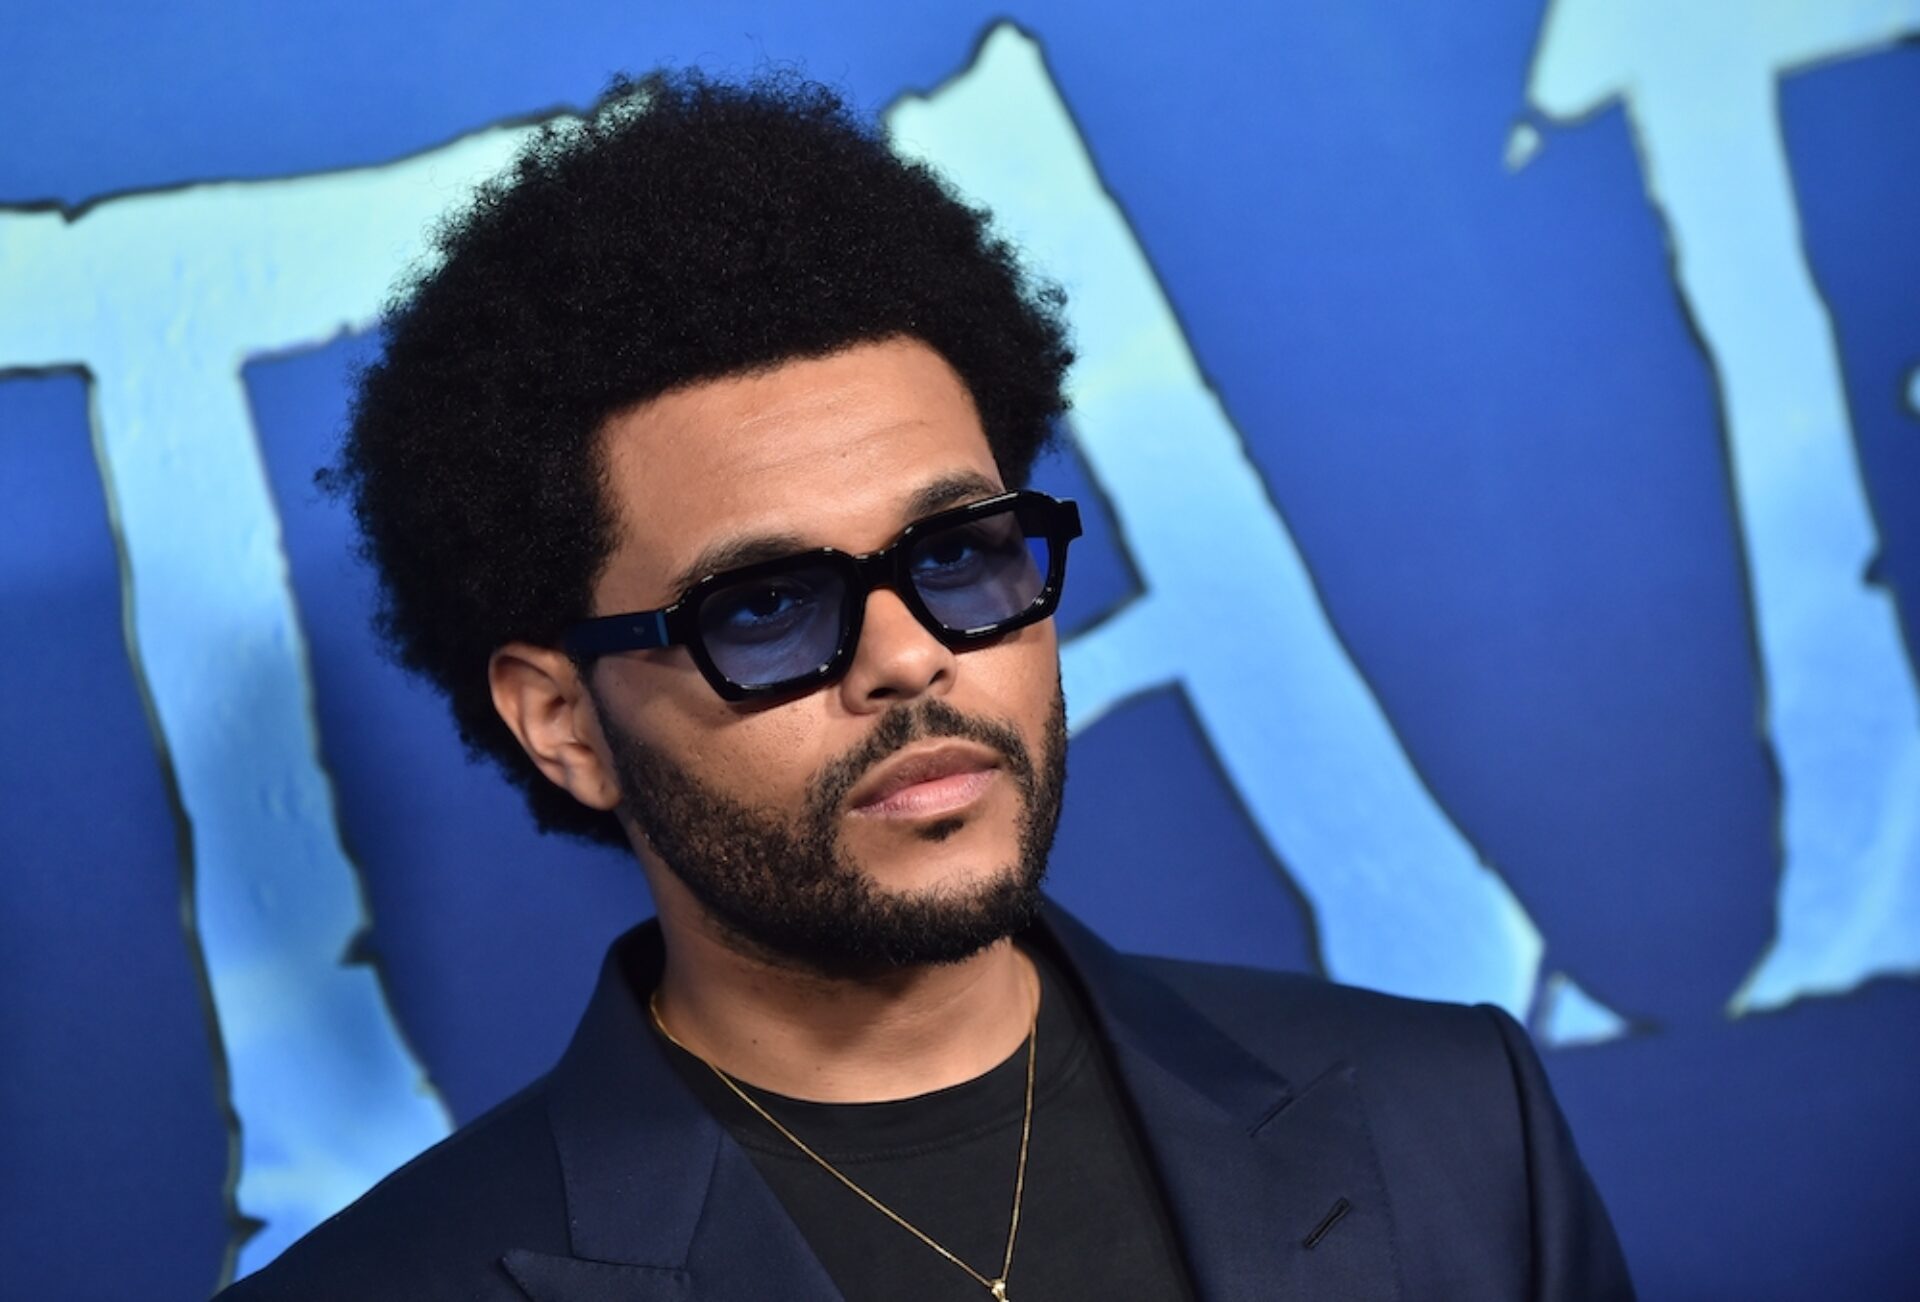 The Big Apple was extra busy this weekend. The Weeknd headlined the first 